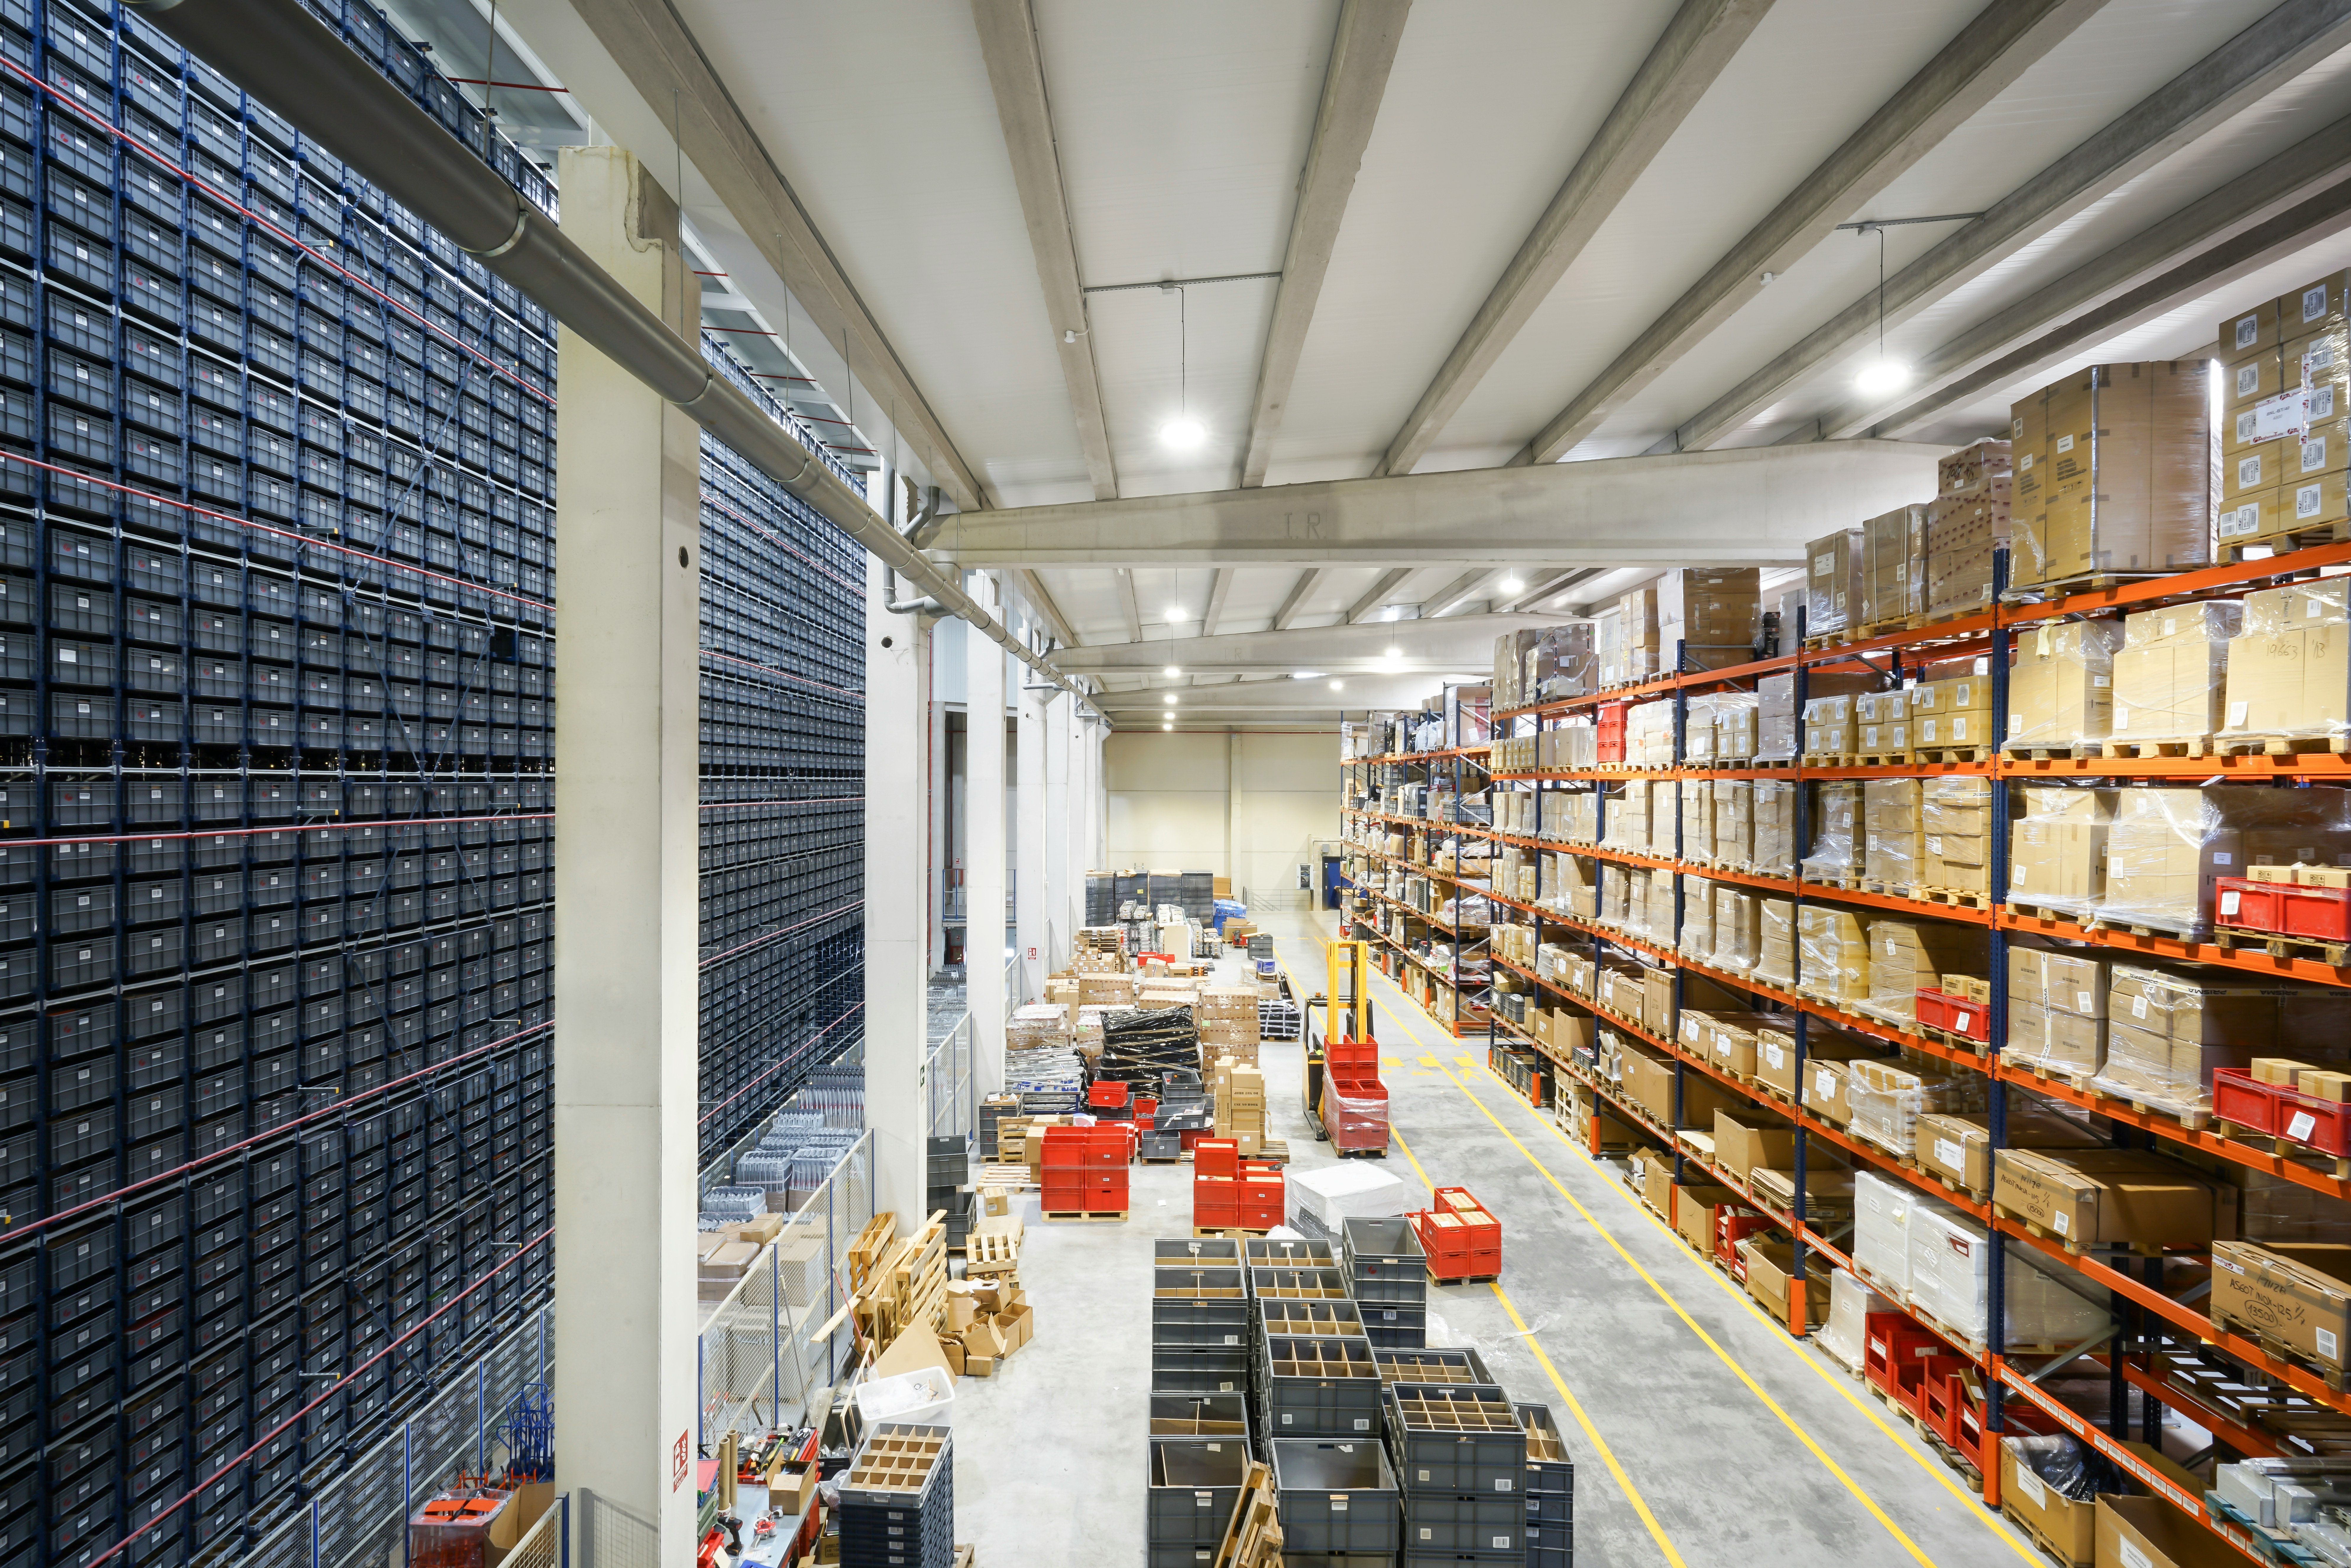 Streamlining Your Move to Outsourced Storage